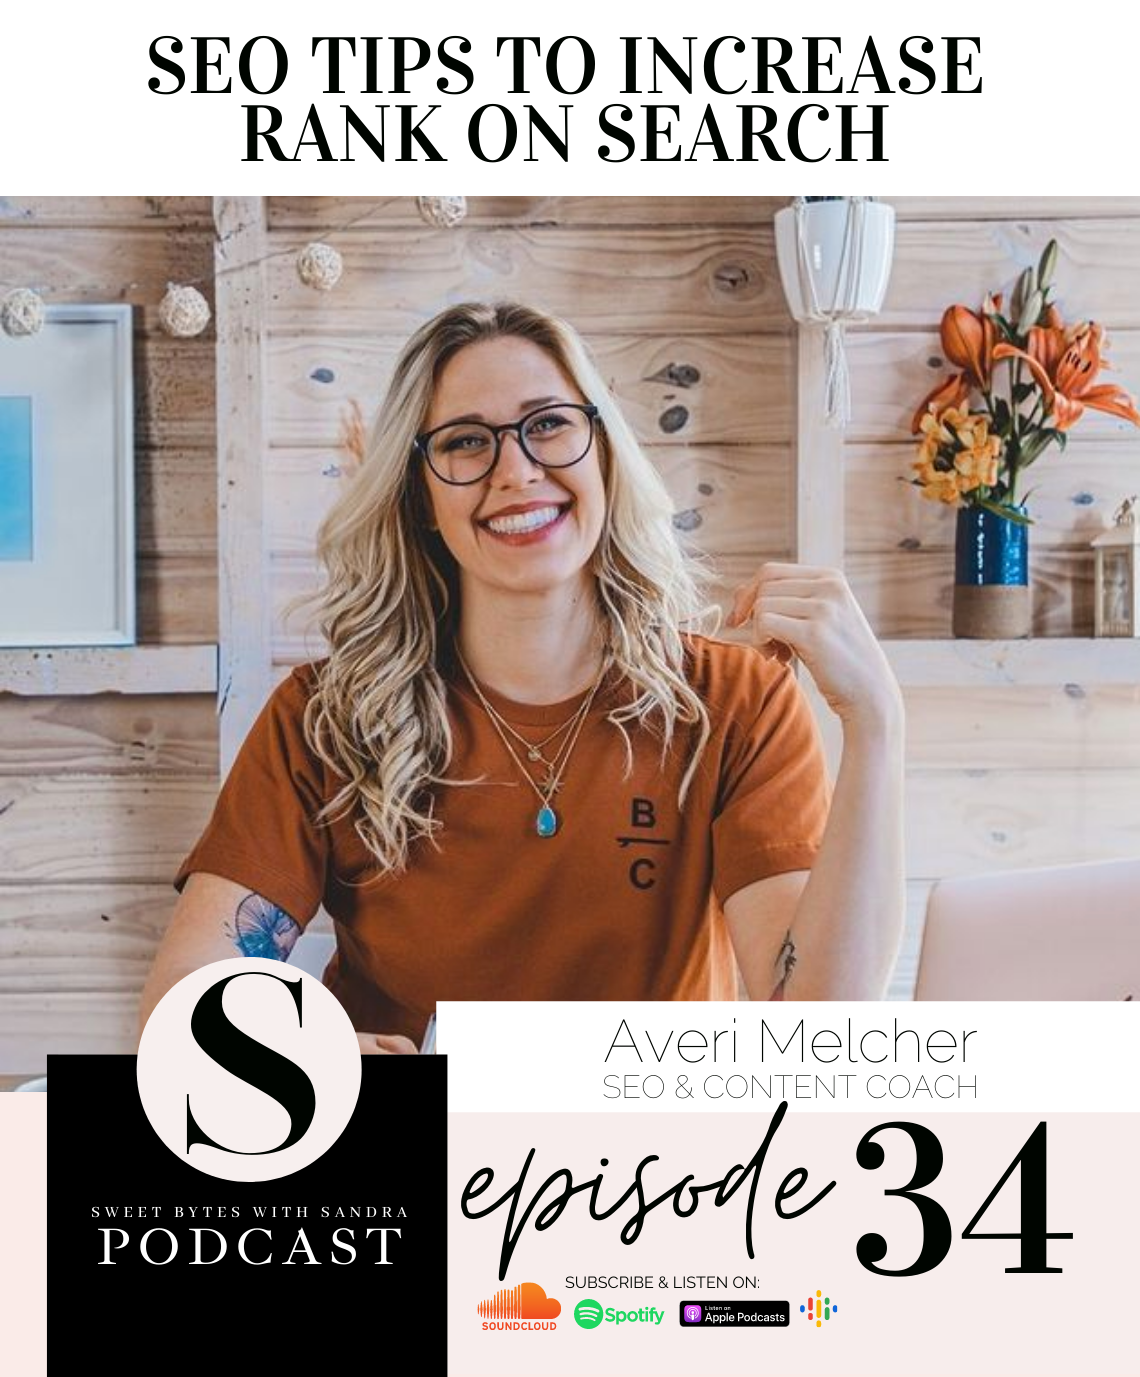 Averi Melcher, SEO and content coach guest on the Sweet Bytes with Sandra Podcast